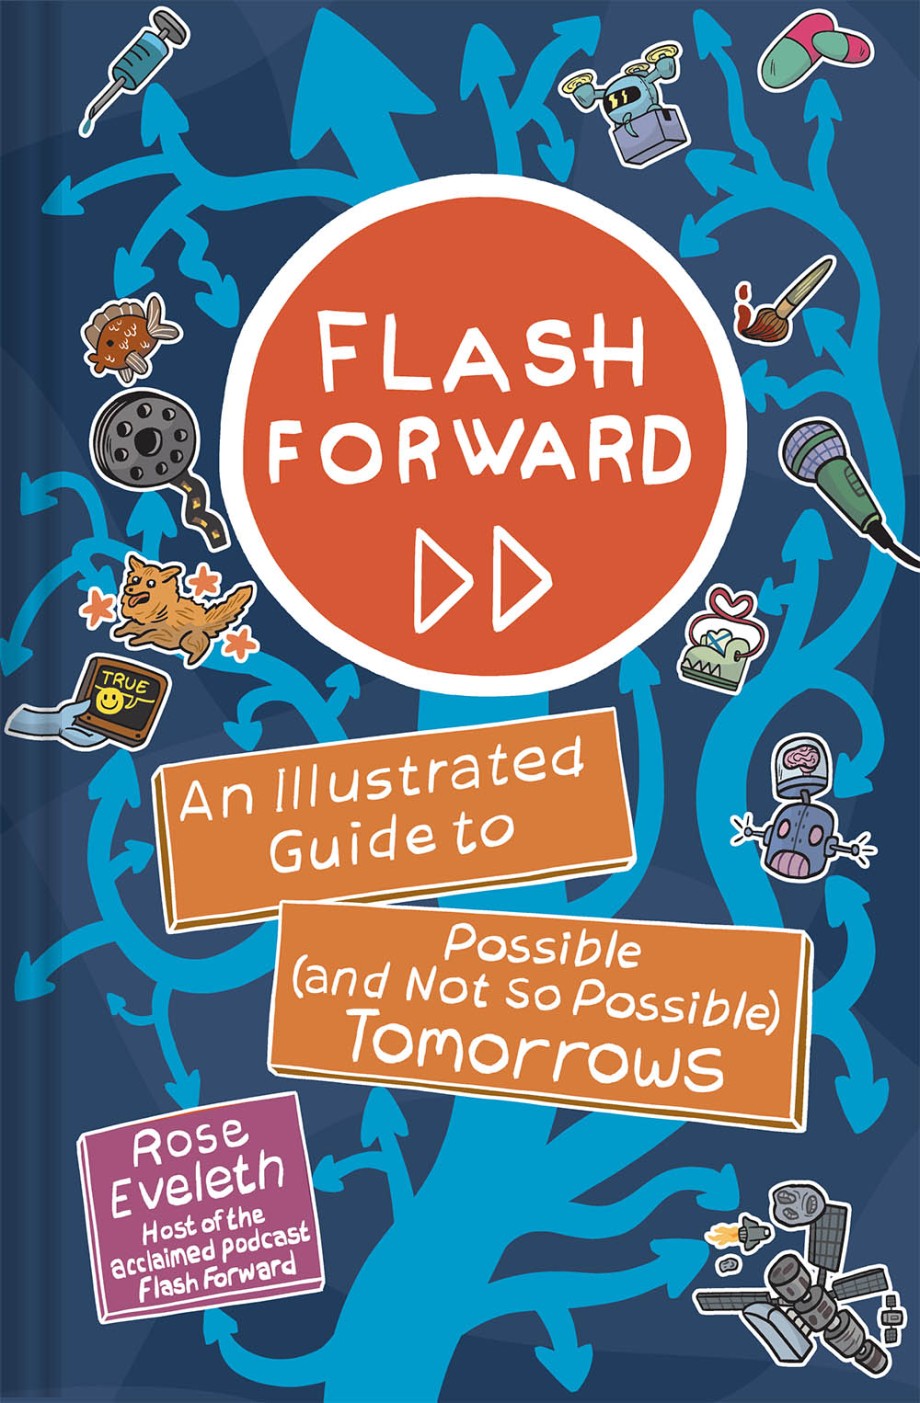 Flash Forward An Illustrated Guide to Possible (and Not So Possible) Tomorrows